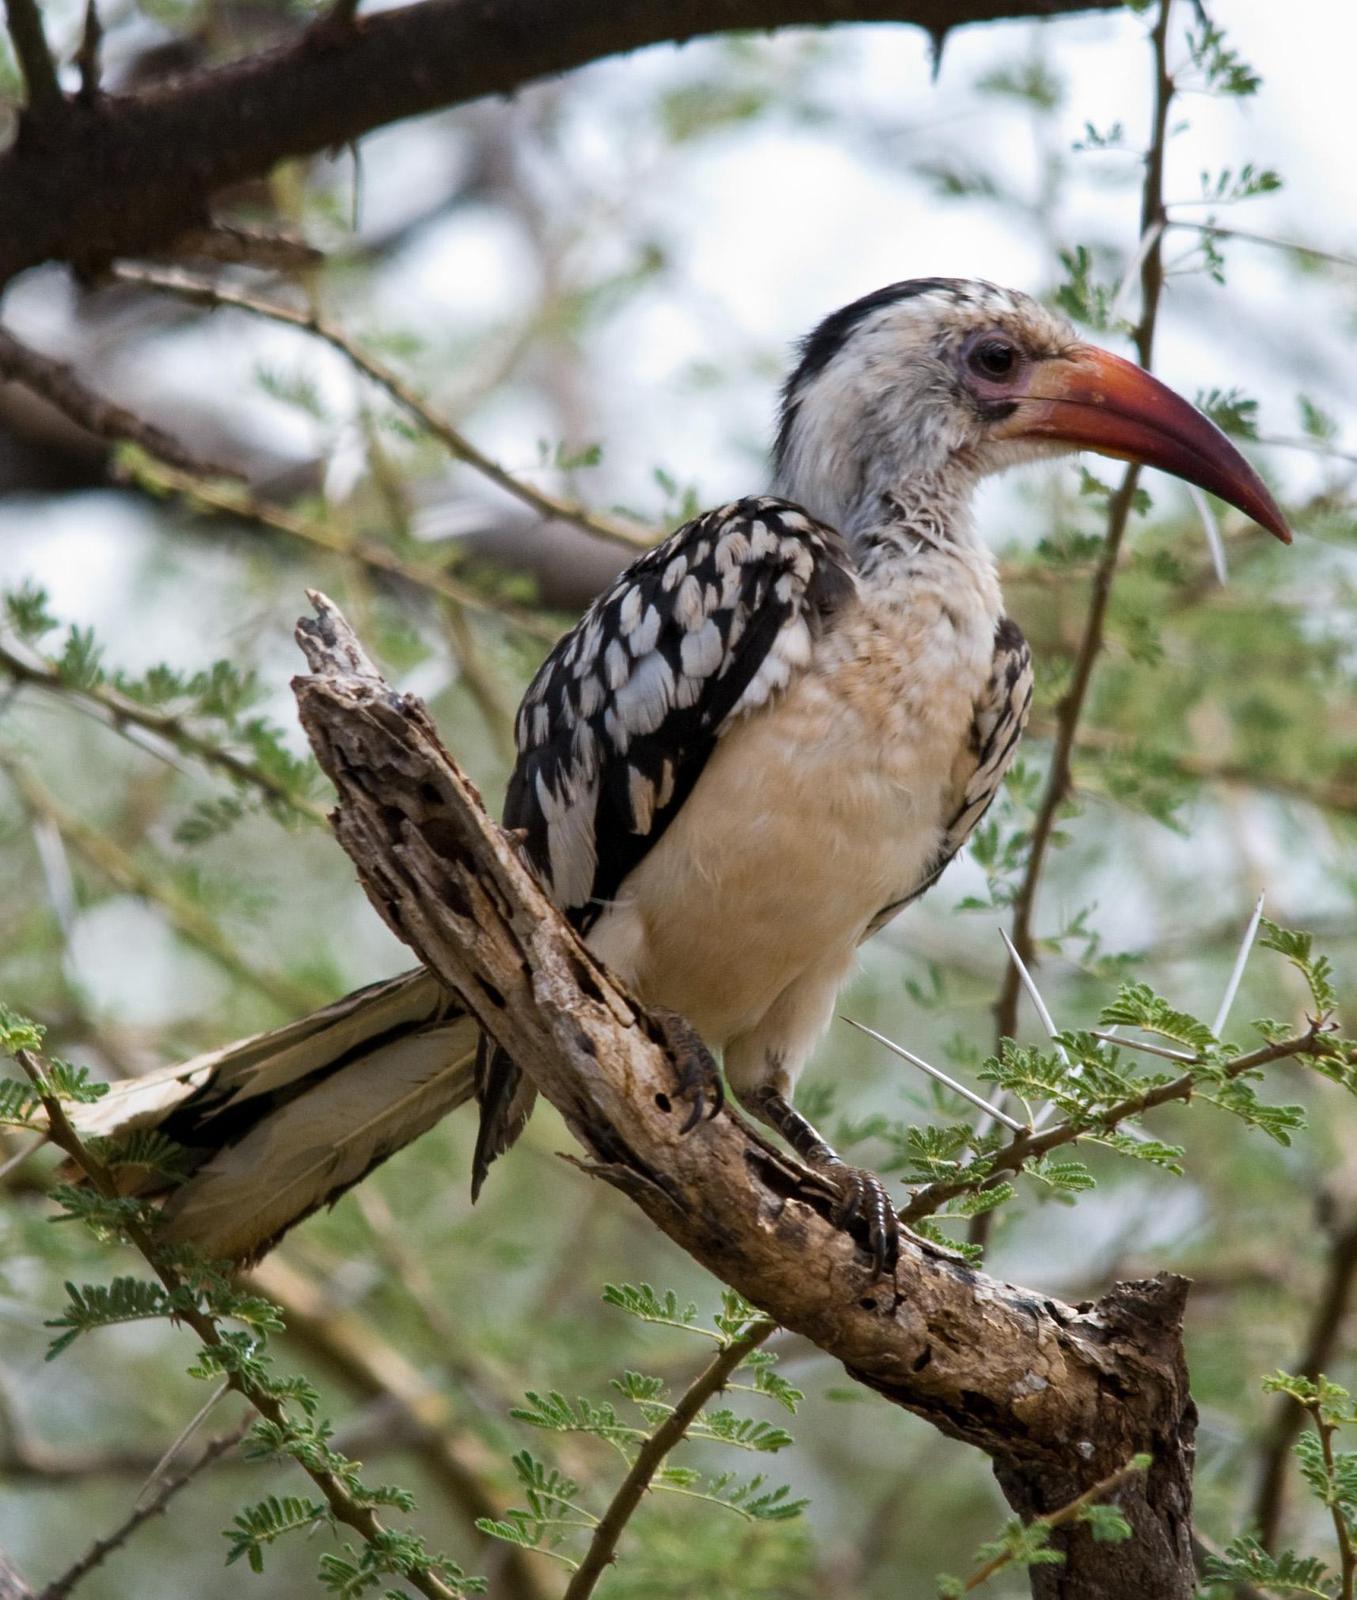 Northern Red-billed Hornbill Photo by Carol Foil